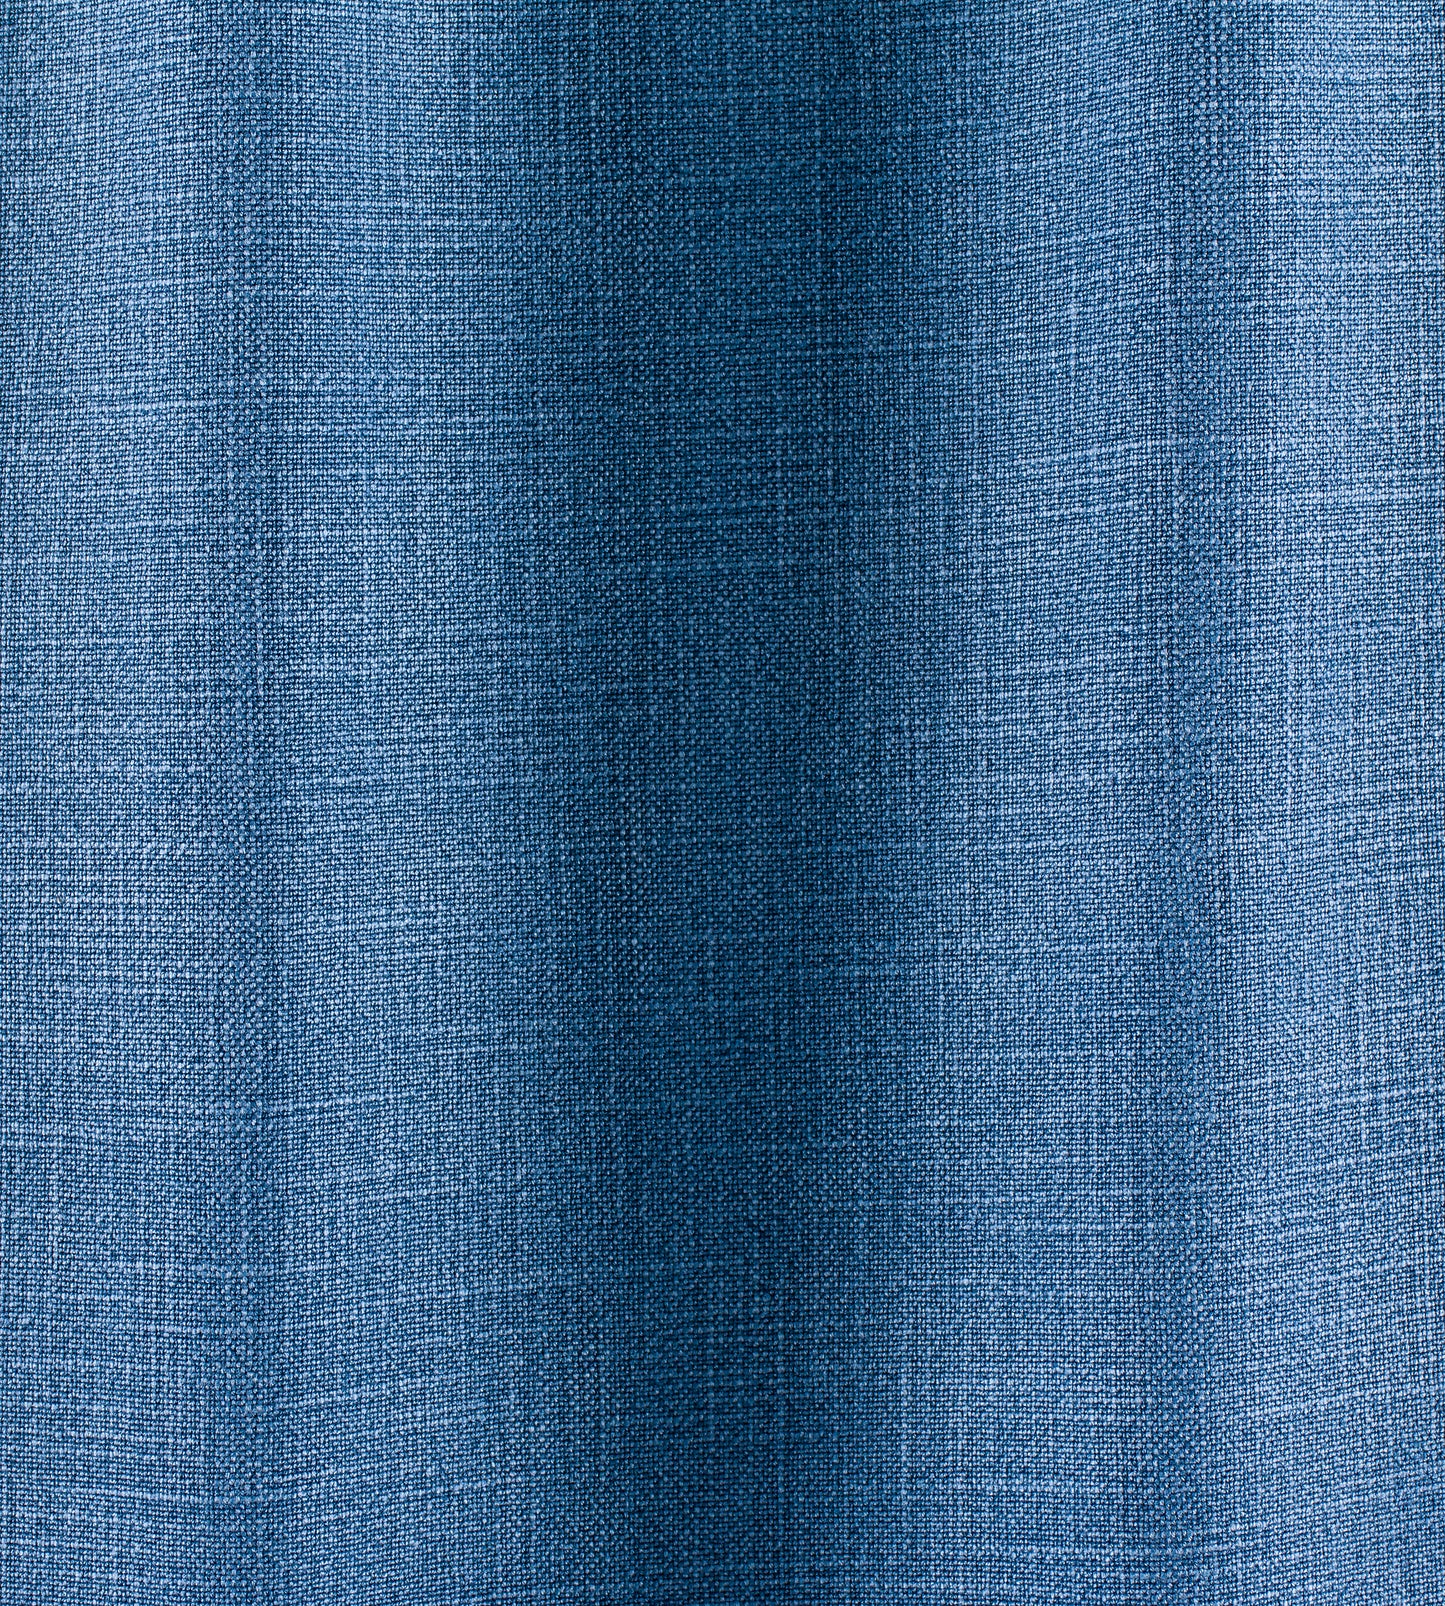 Purchase Old World Weavers Fabric Product H8 0016406T, Stonewash Lakeview 4